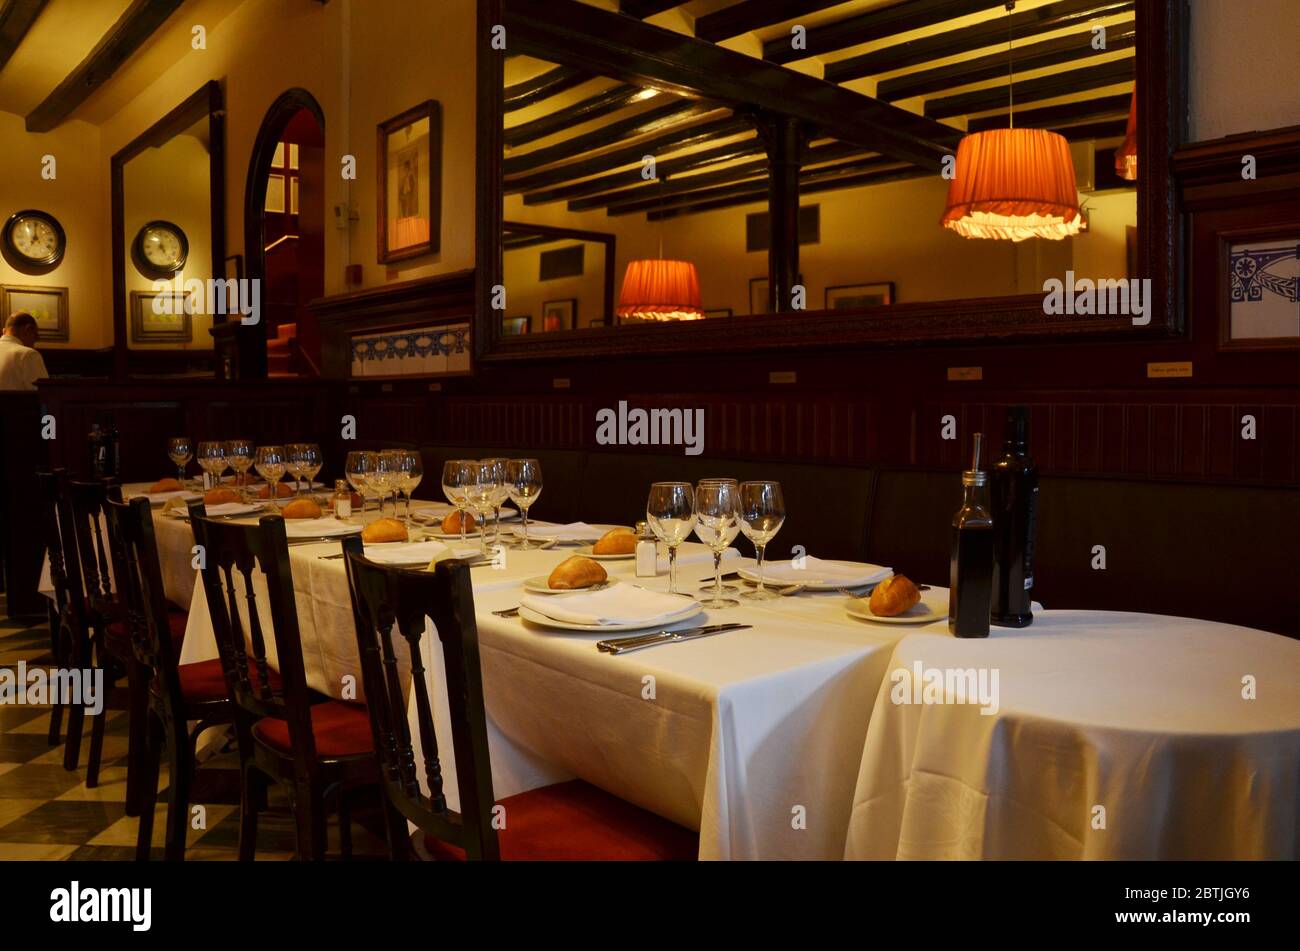 Restaurant 7 Portes was founded in 1836, making it one of the oldest restaurants in Barcelona. Stock Photo